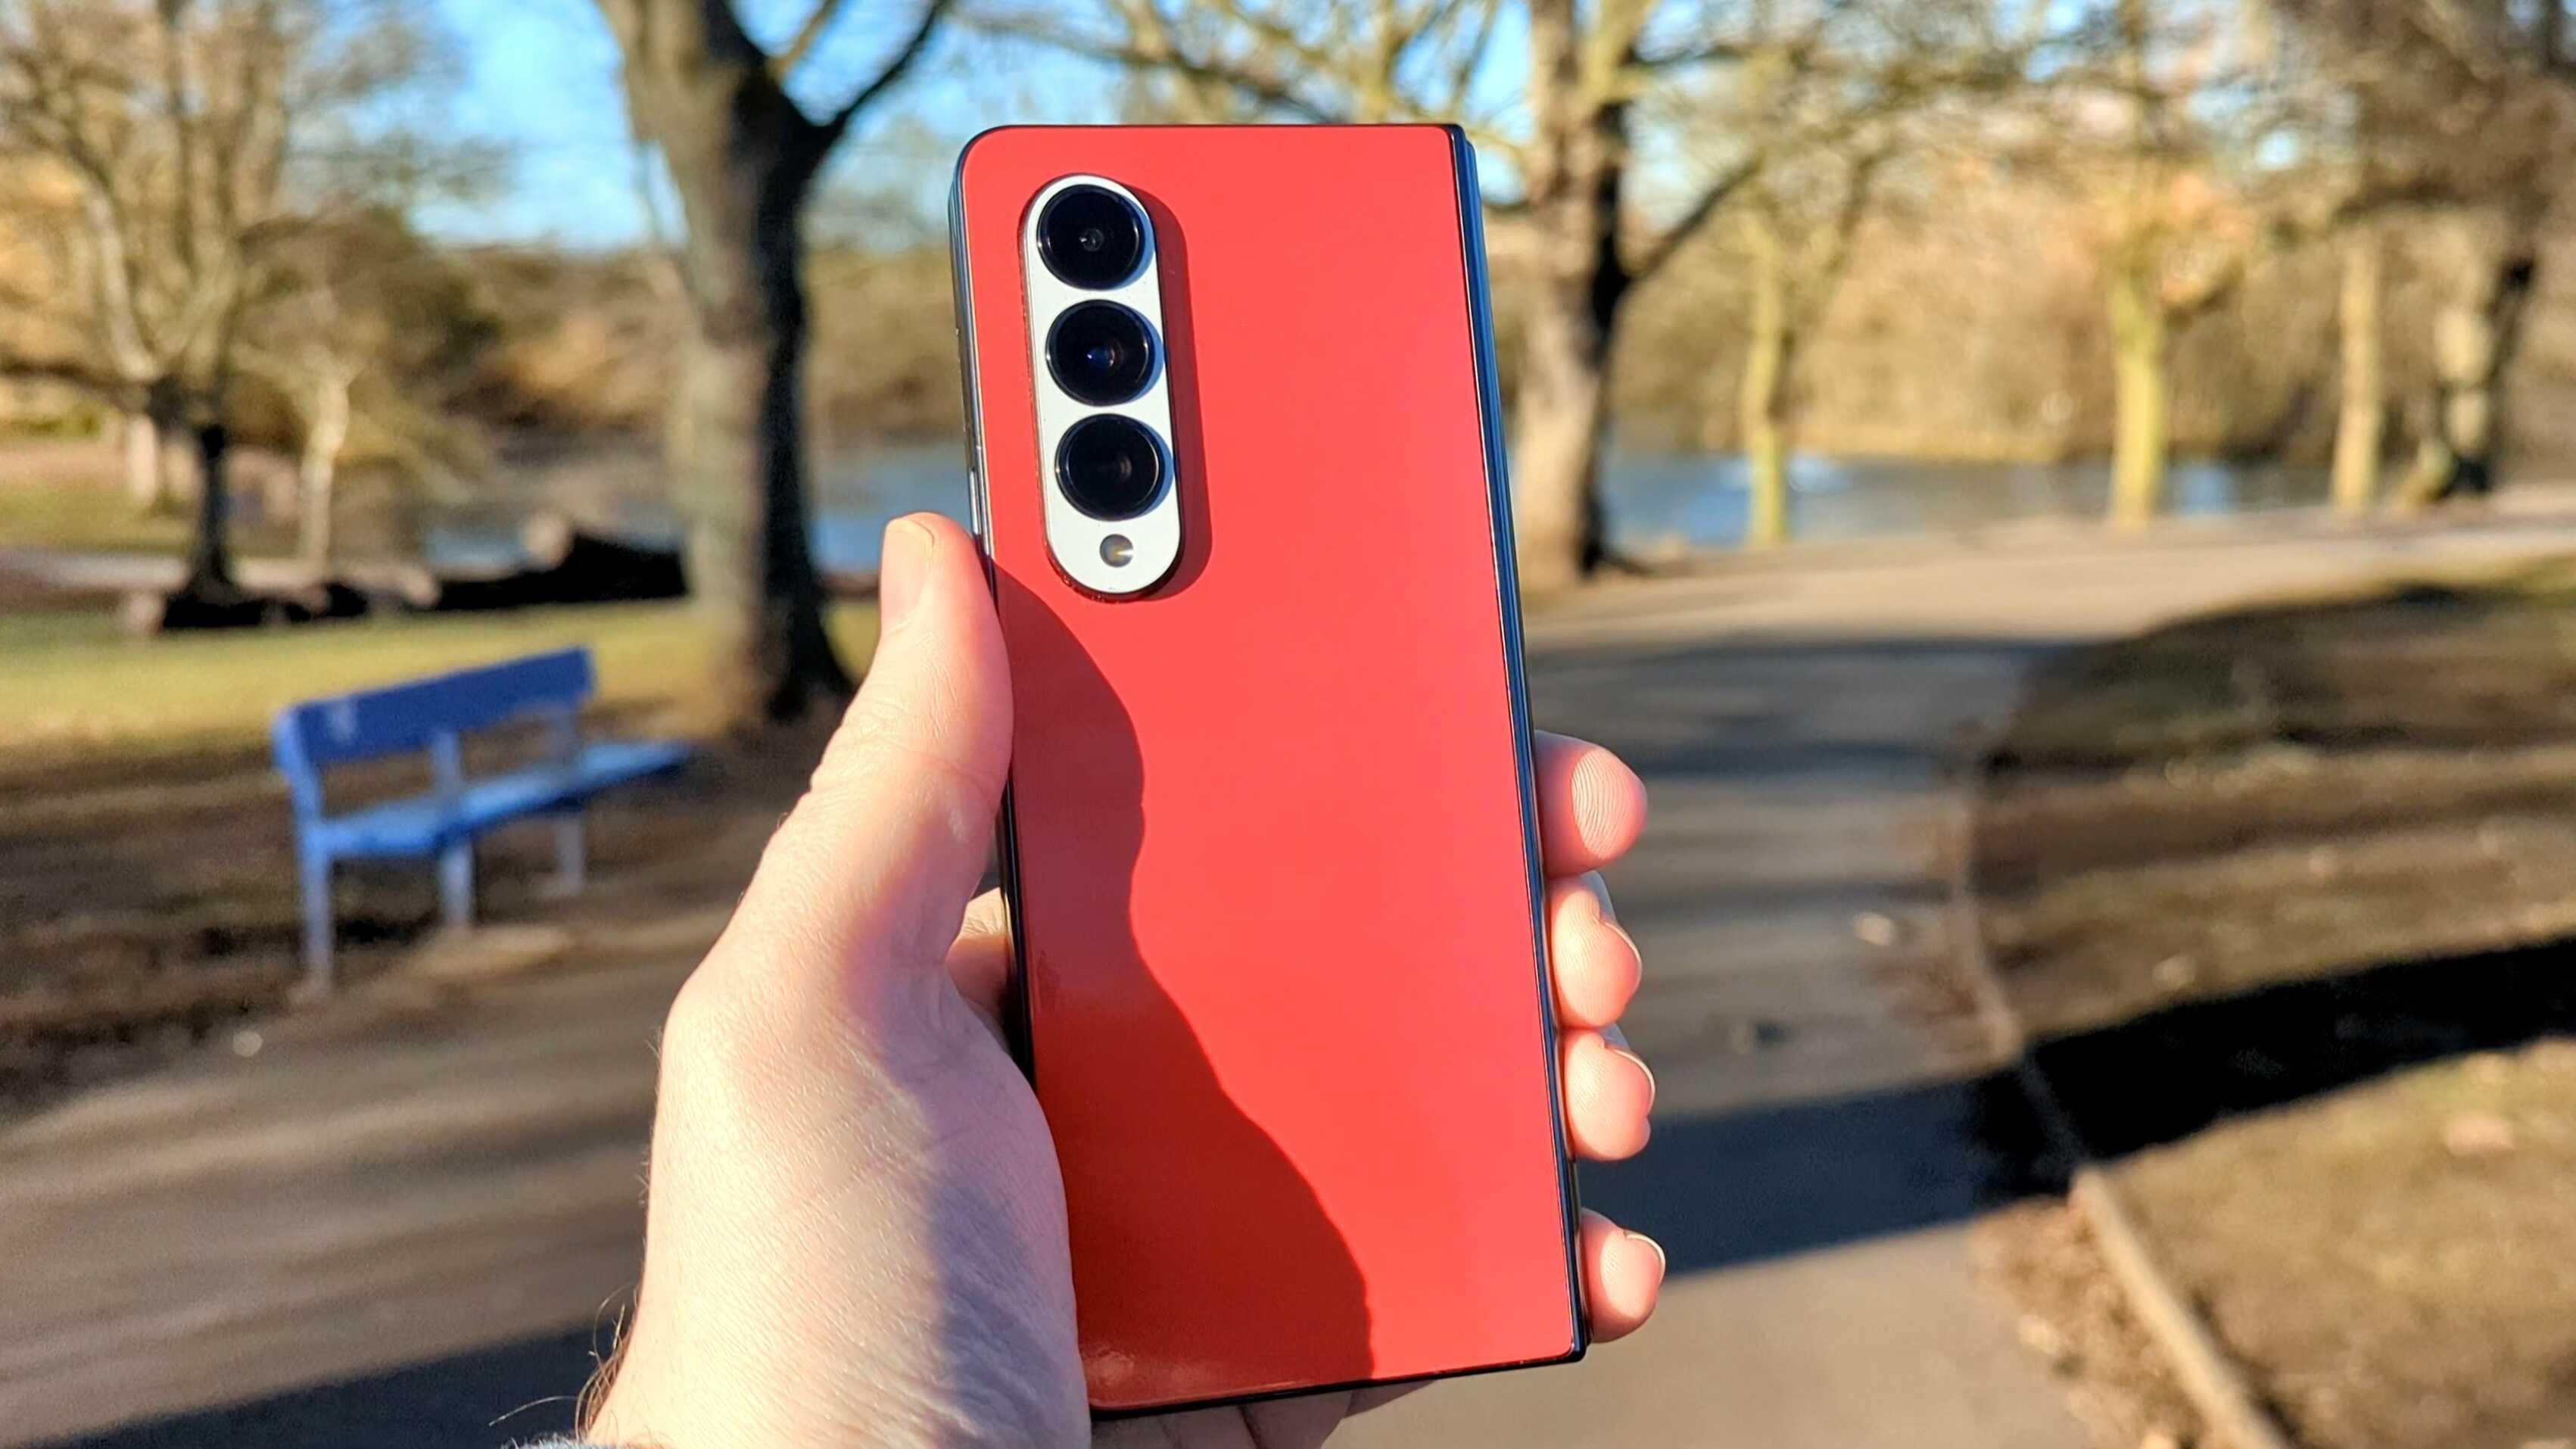 Samsung Galaxy Z Fold 4 with red skin on the back held up in the sun.